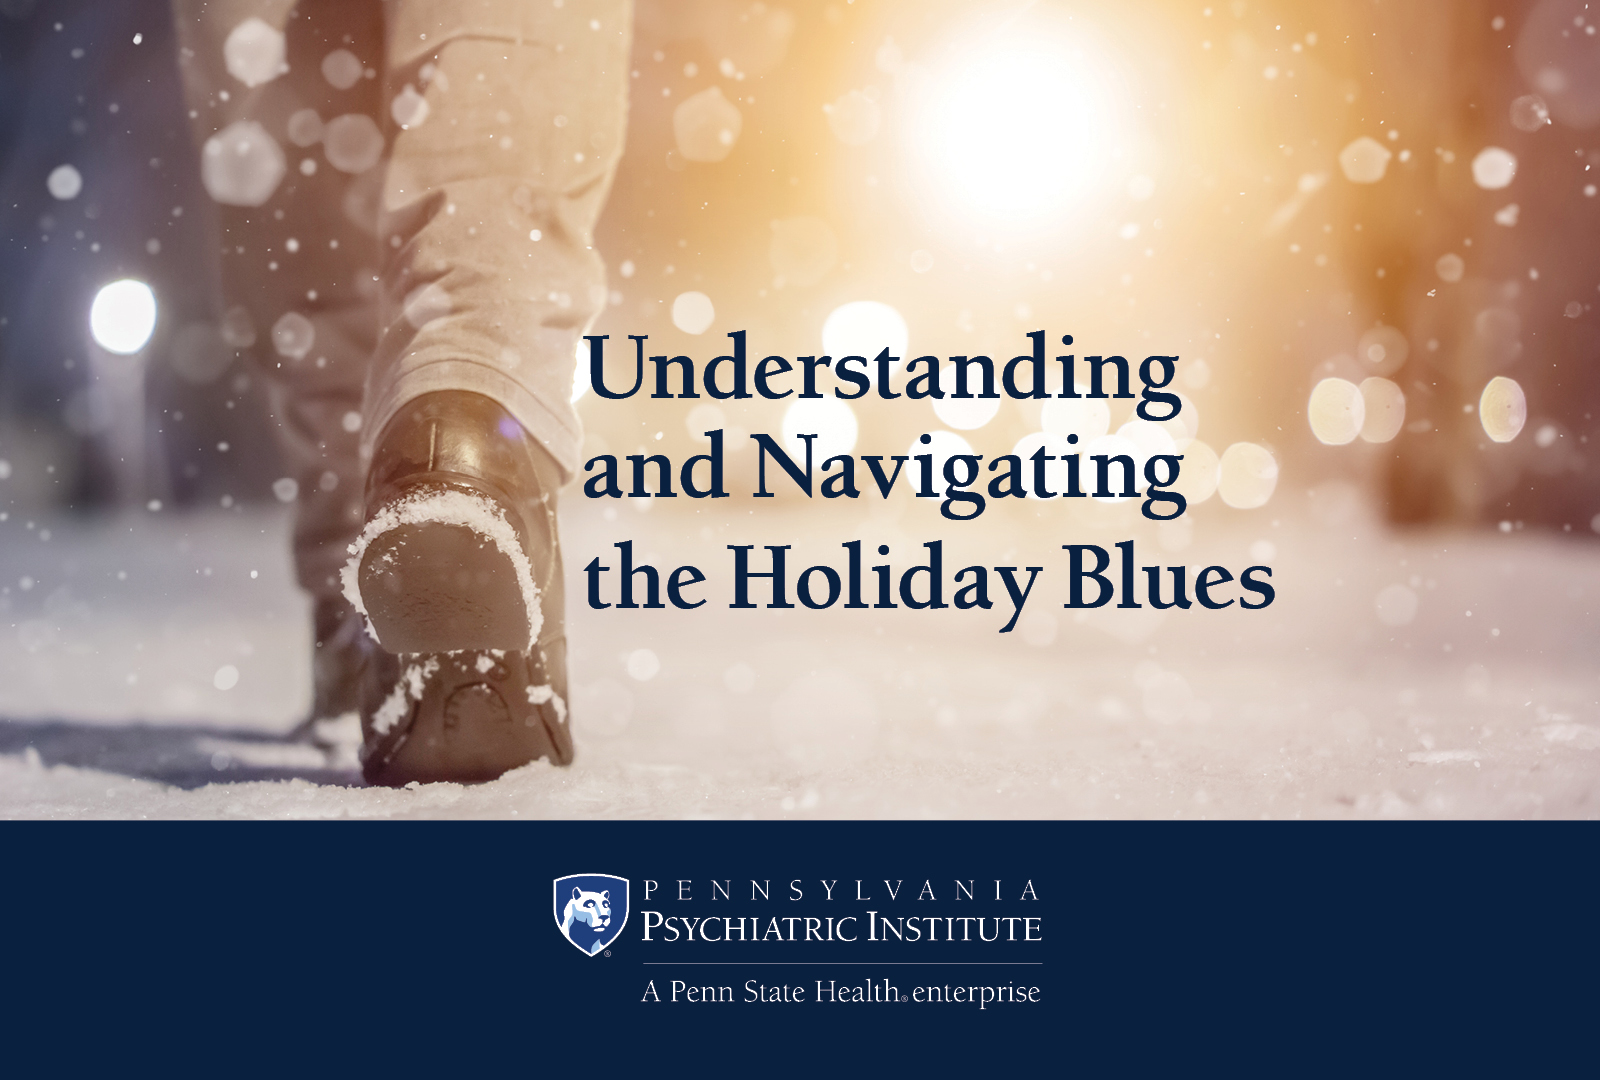 Understanding and Navigating the Holiday Blues